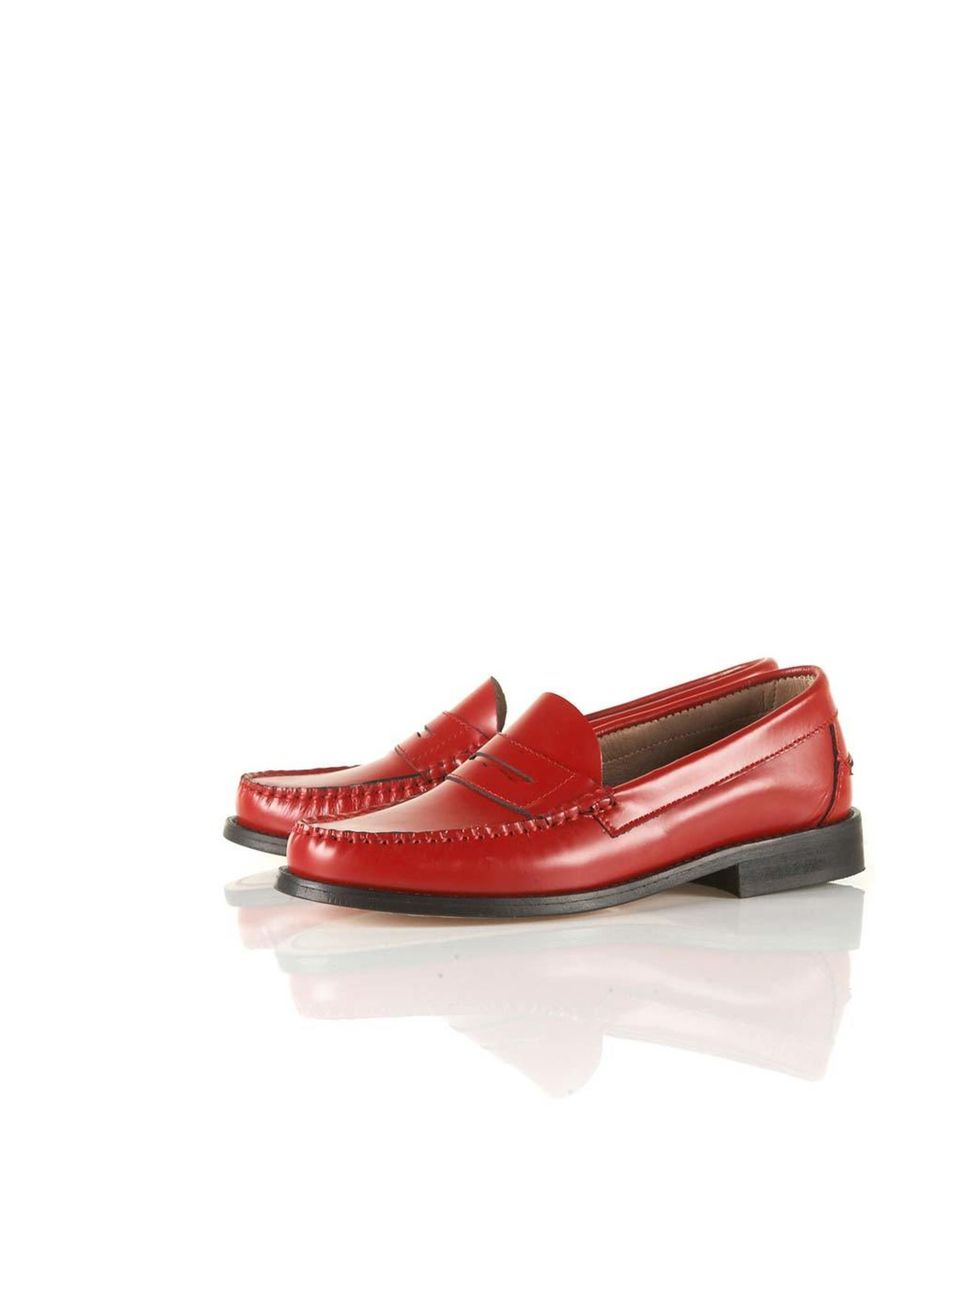 <p>JW Anderson for Topshop Loafers, £59.99 at <a href="http://www.topshop.com/webapp/wcs/stores/servlet/ProductDisplay?beginIndex=61&amp;viewAllFlag=&amp;catalogId=33057&amp;storeId=12556&amp;productId=6594685&amp;langId=-1&amp;sort_field=Newness&amp;cate